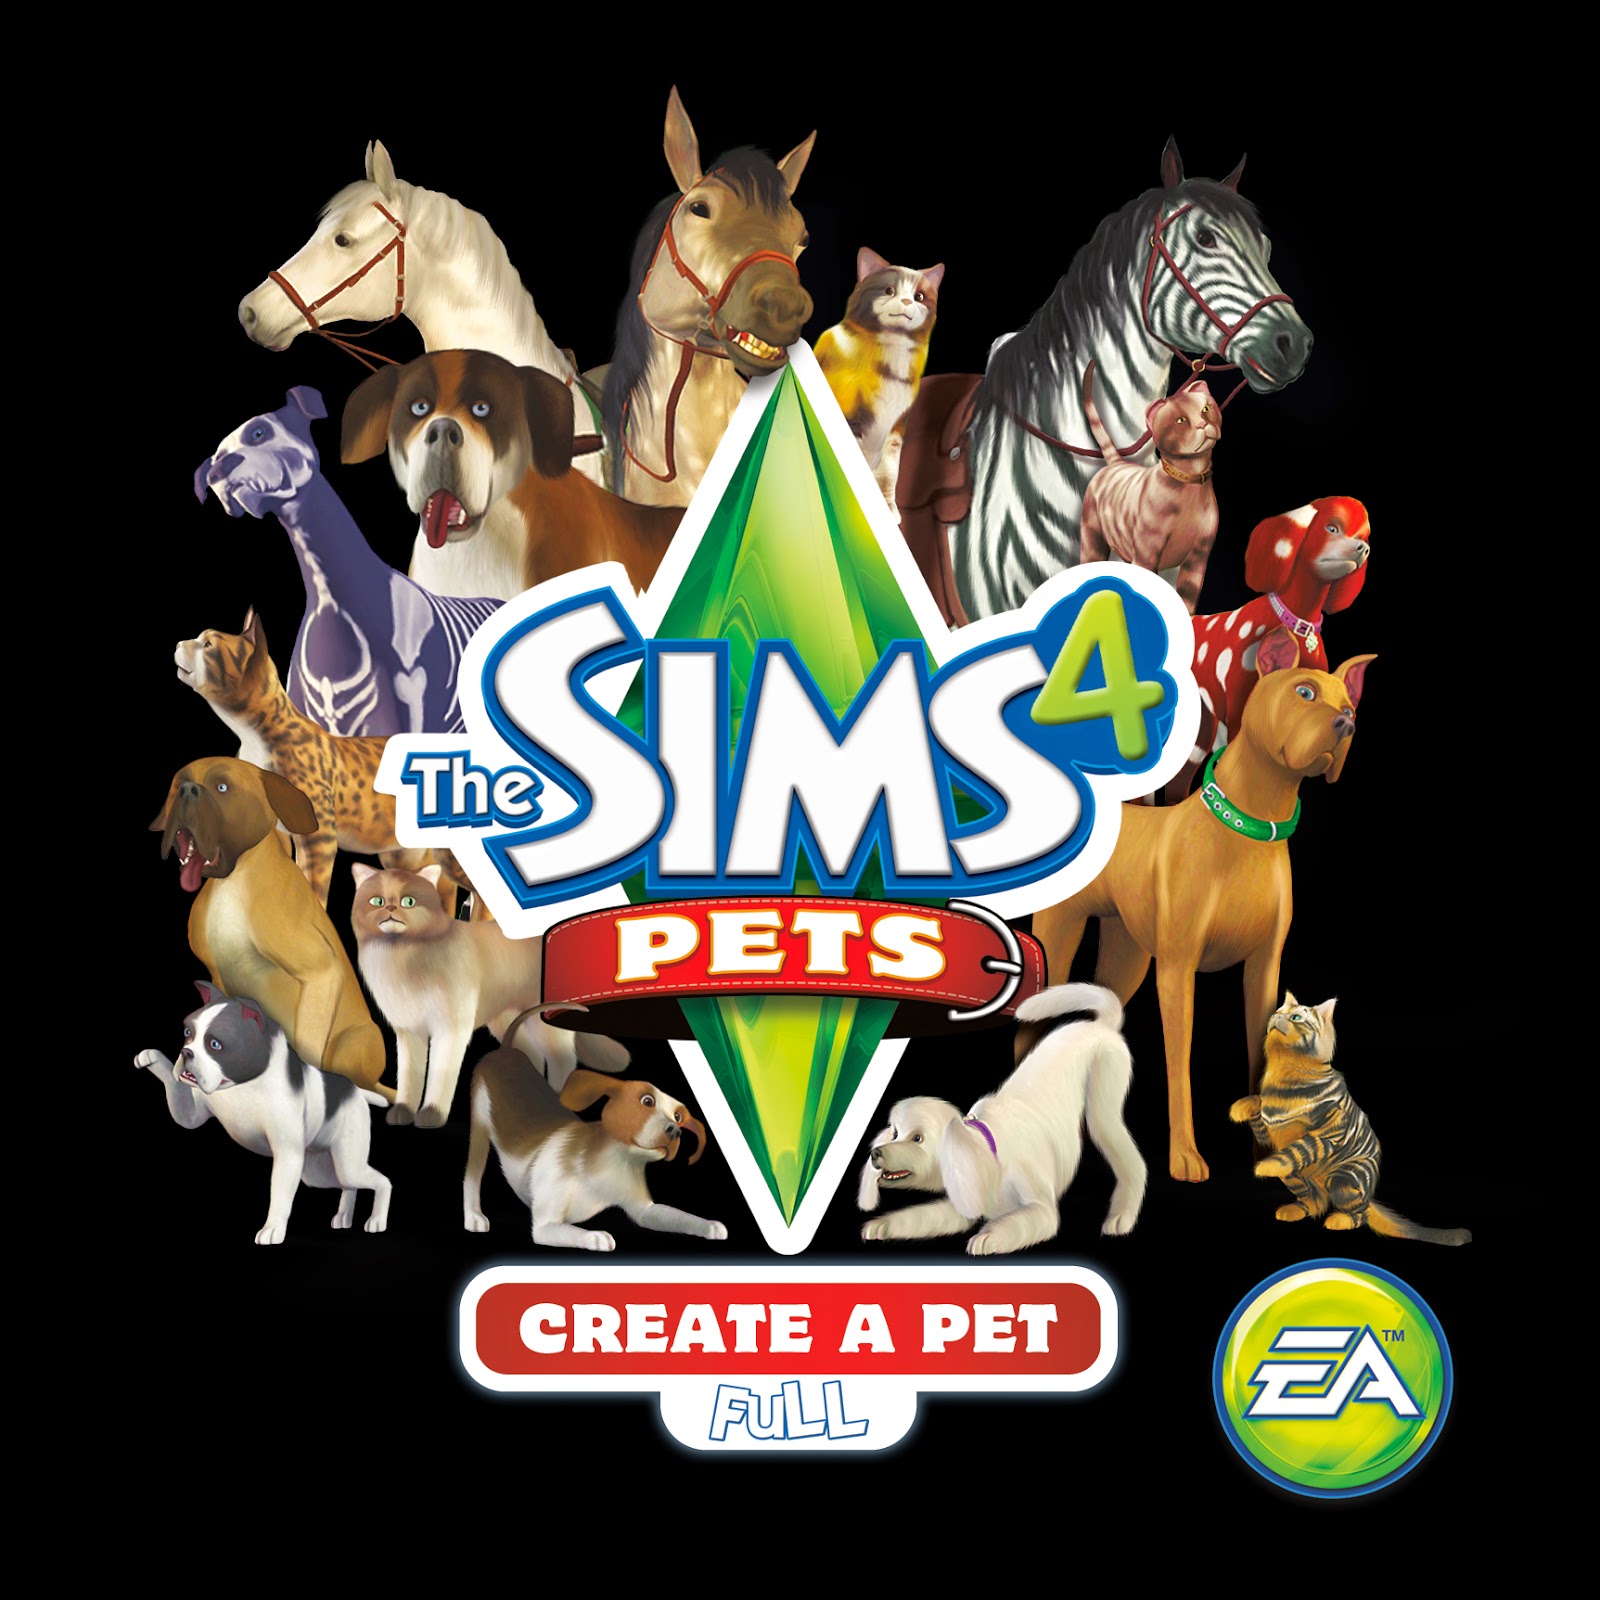 Wicked pets. The SIMS 3 питомцы. Симс 3 петс. SIMS 4 Pets. SIMS 4 питомцы обложка.